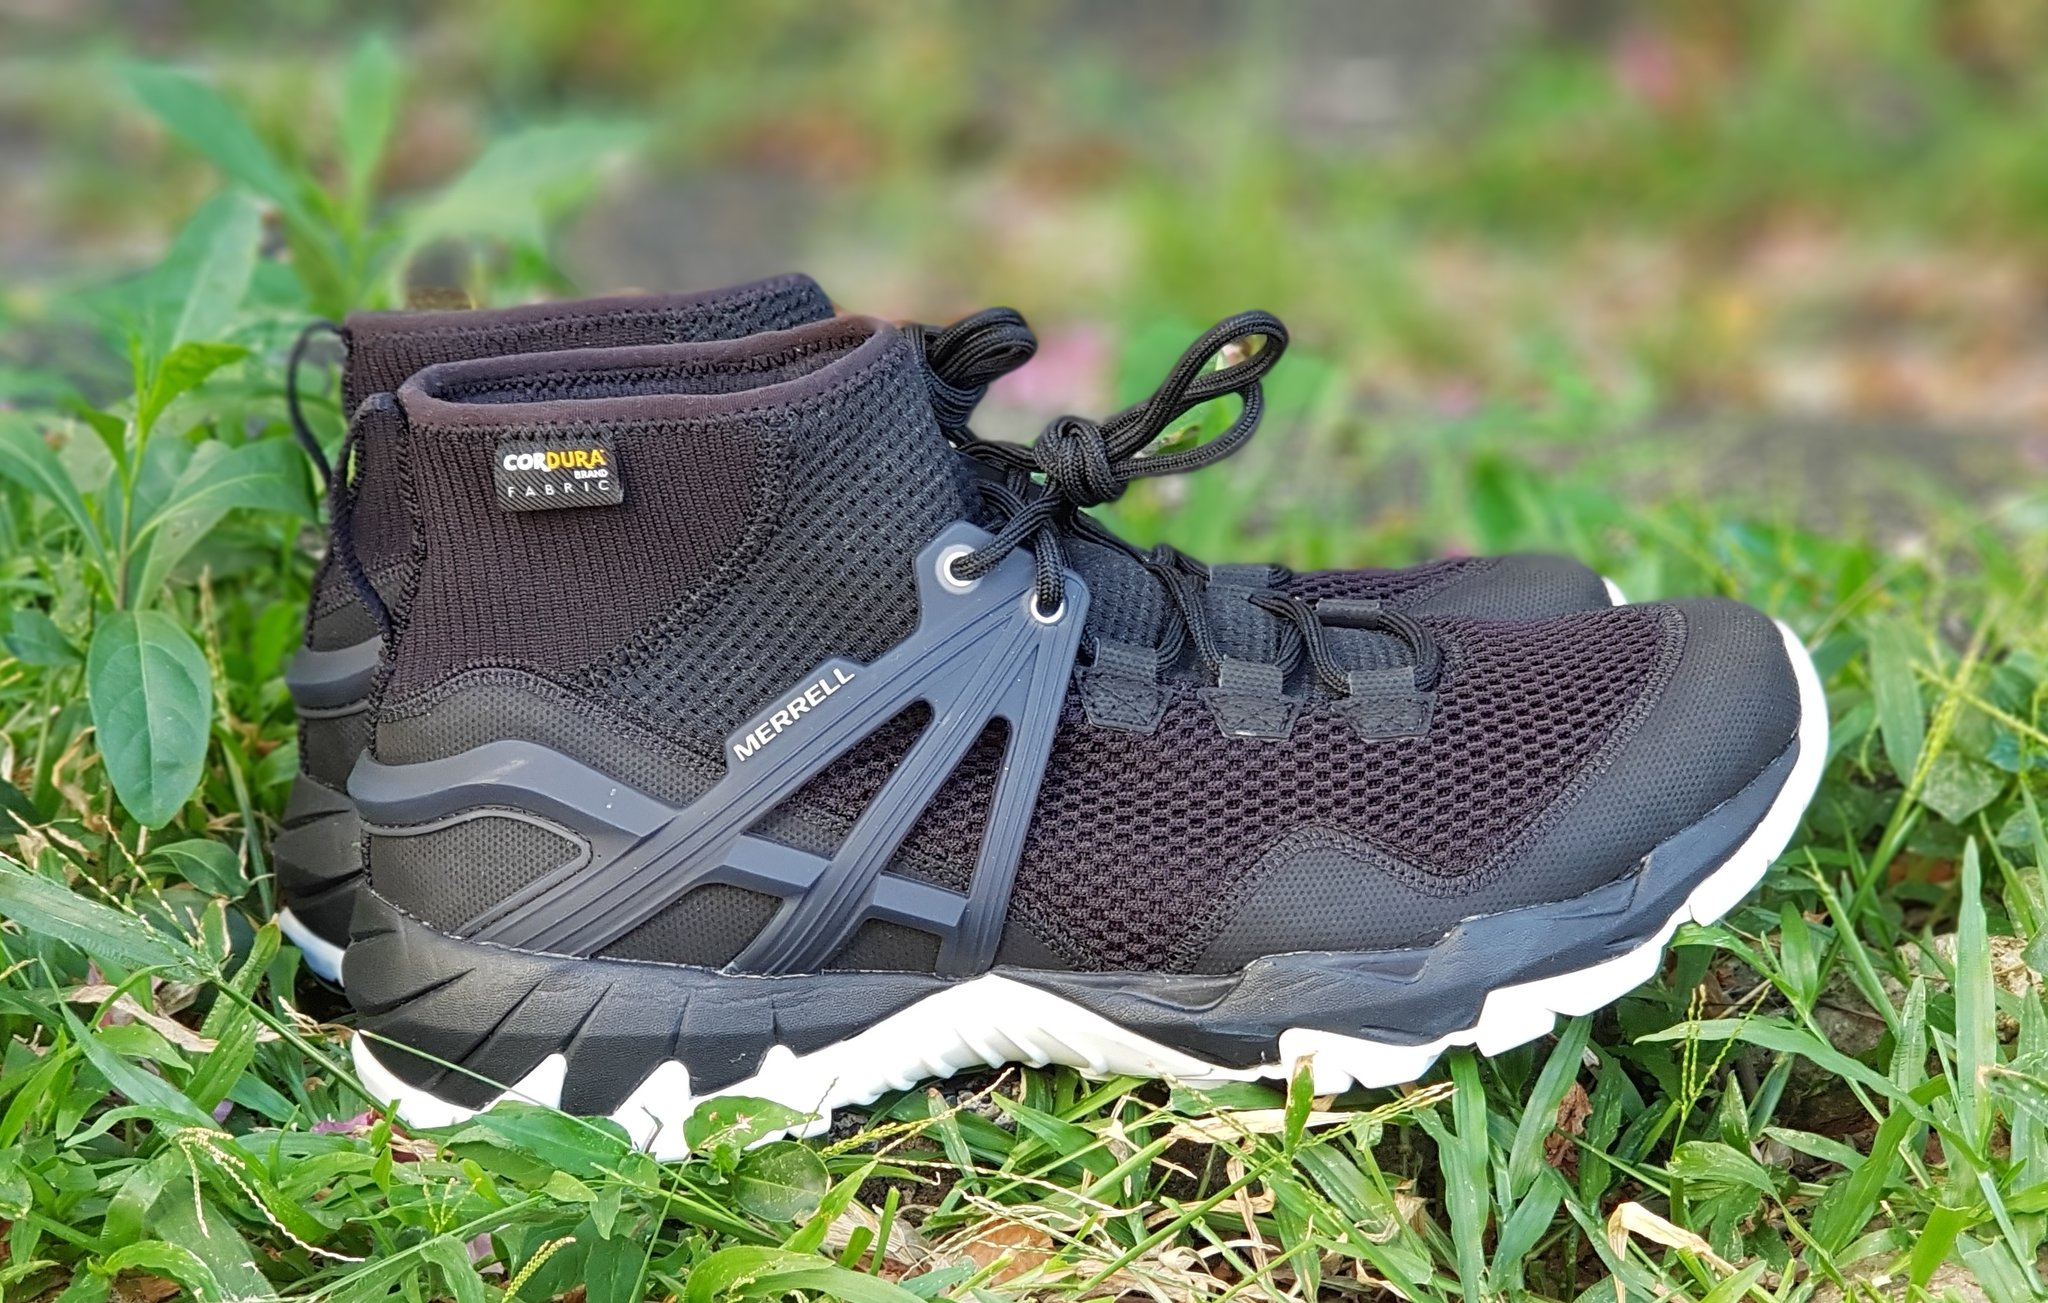 Mark Zambrano on Twitter: "This sexy from @Merrell_PH is the MQM in black colorway. Equipped Cordura fabric for superior support in any adventure! #merrell #getawaytoadventure #kicks #toughgear https://t.co/kVMYVhzK0Y" /